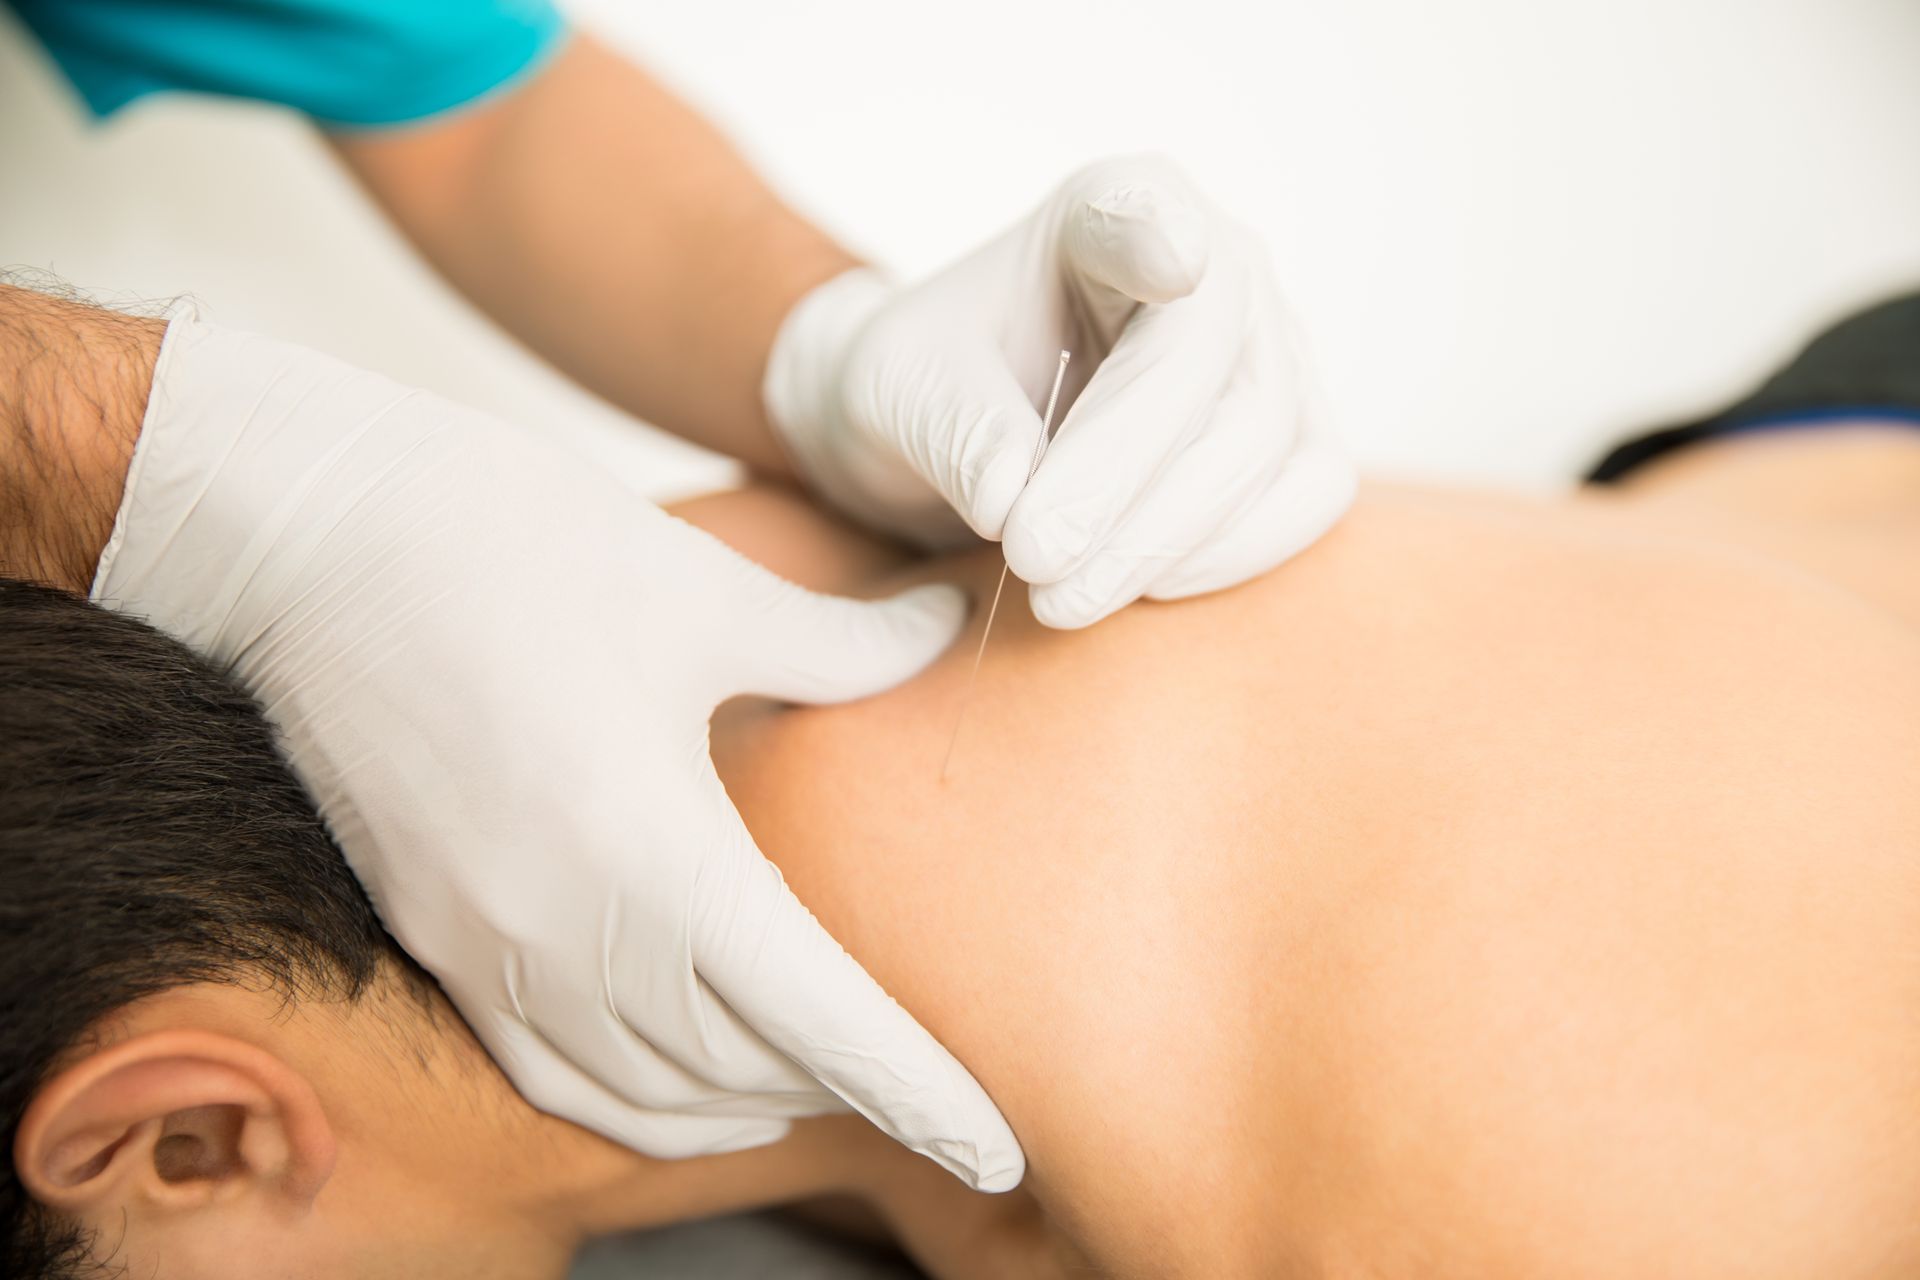 a person is getting a dry needling treatment on the back of their neck